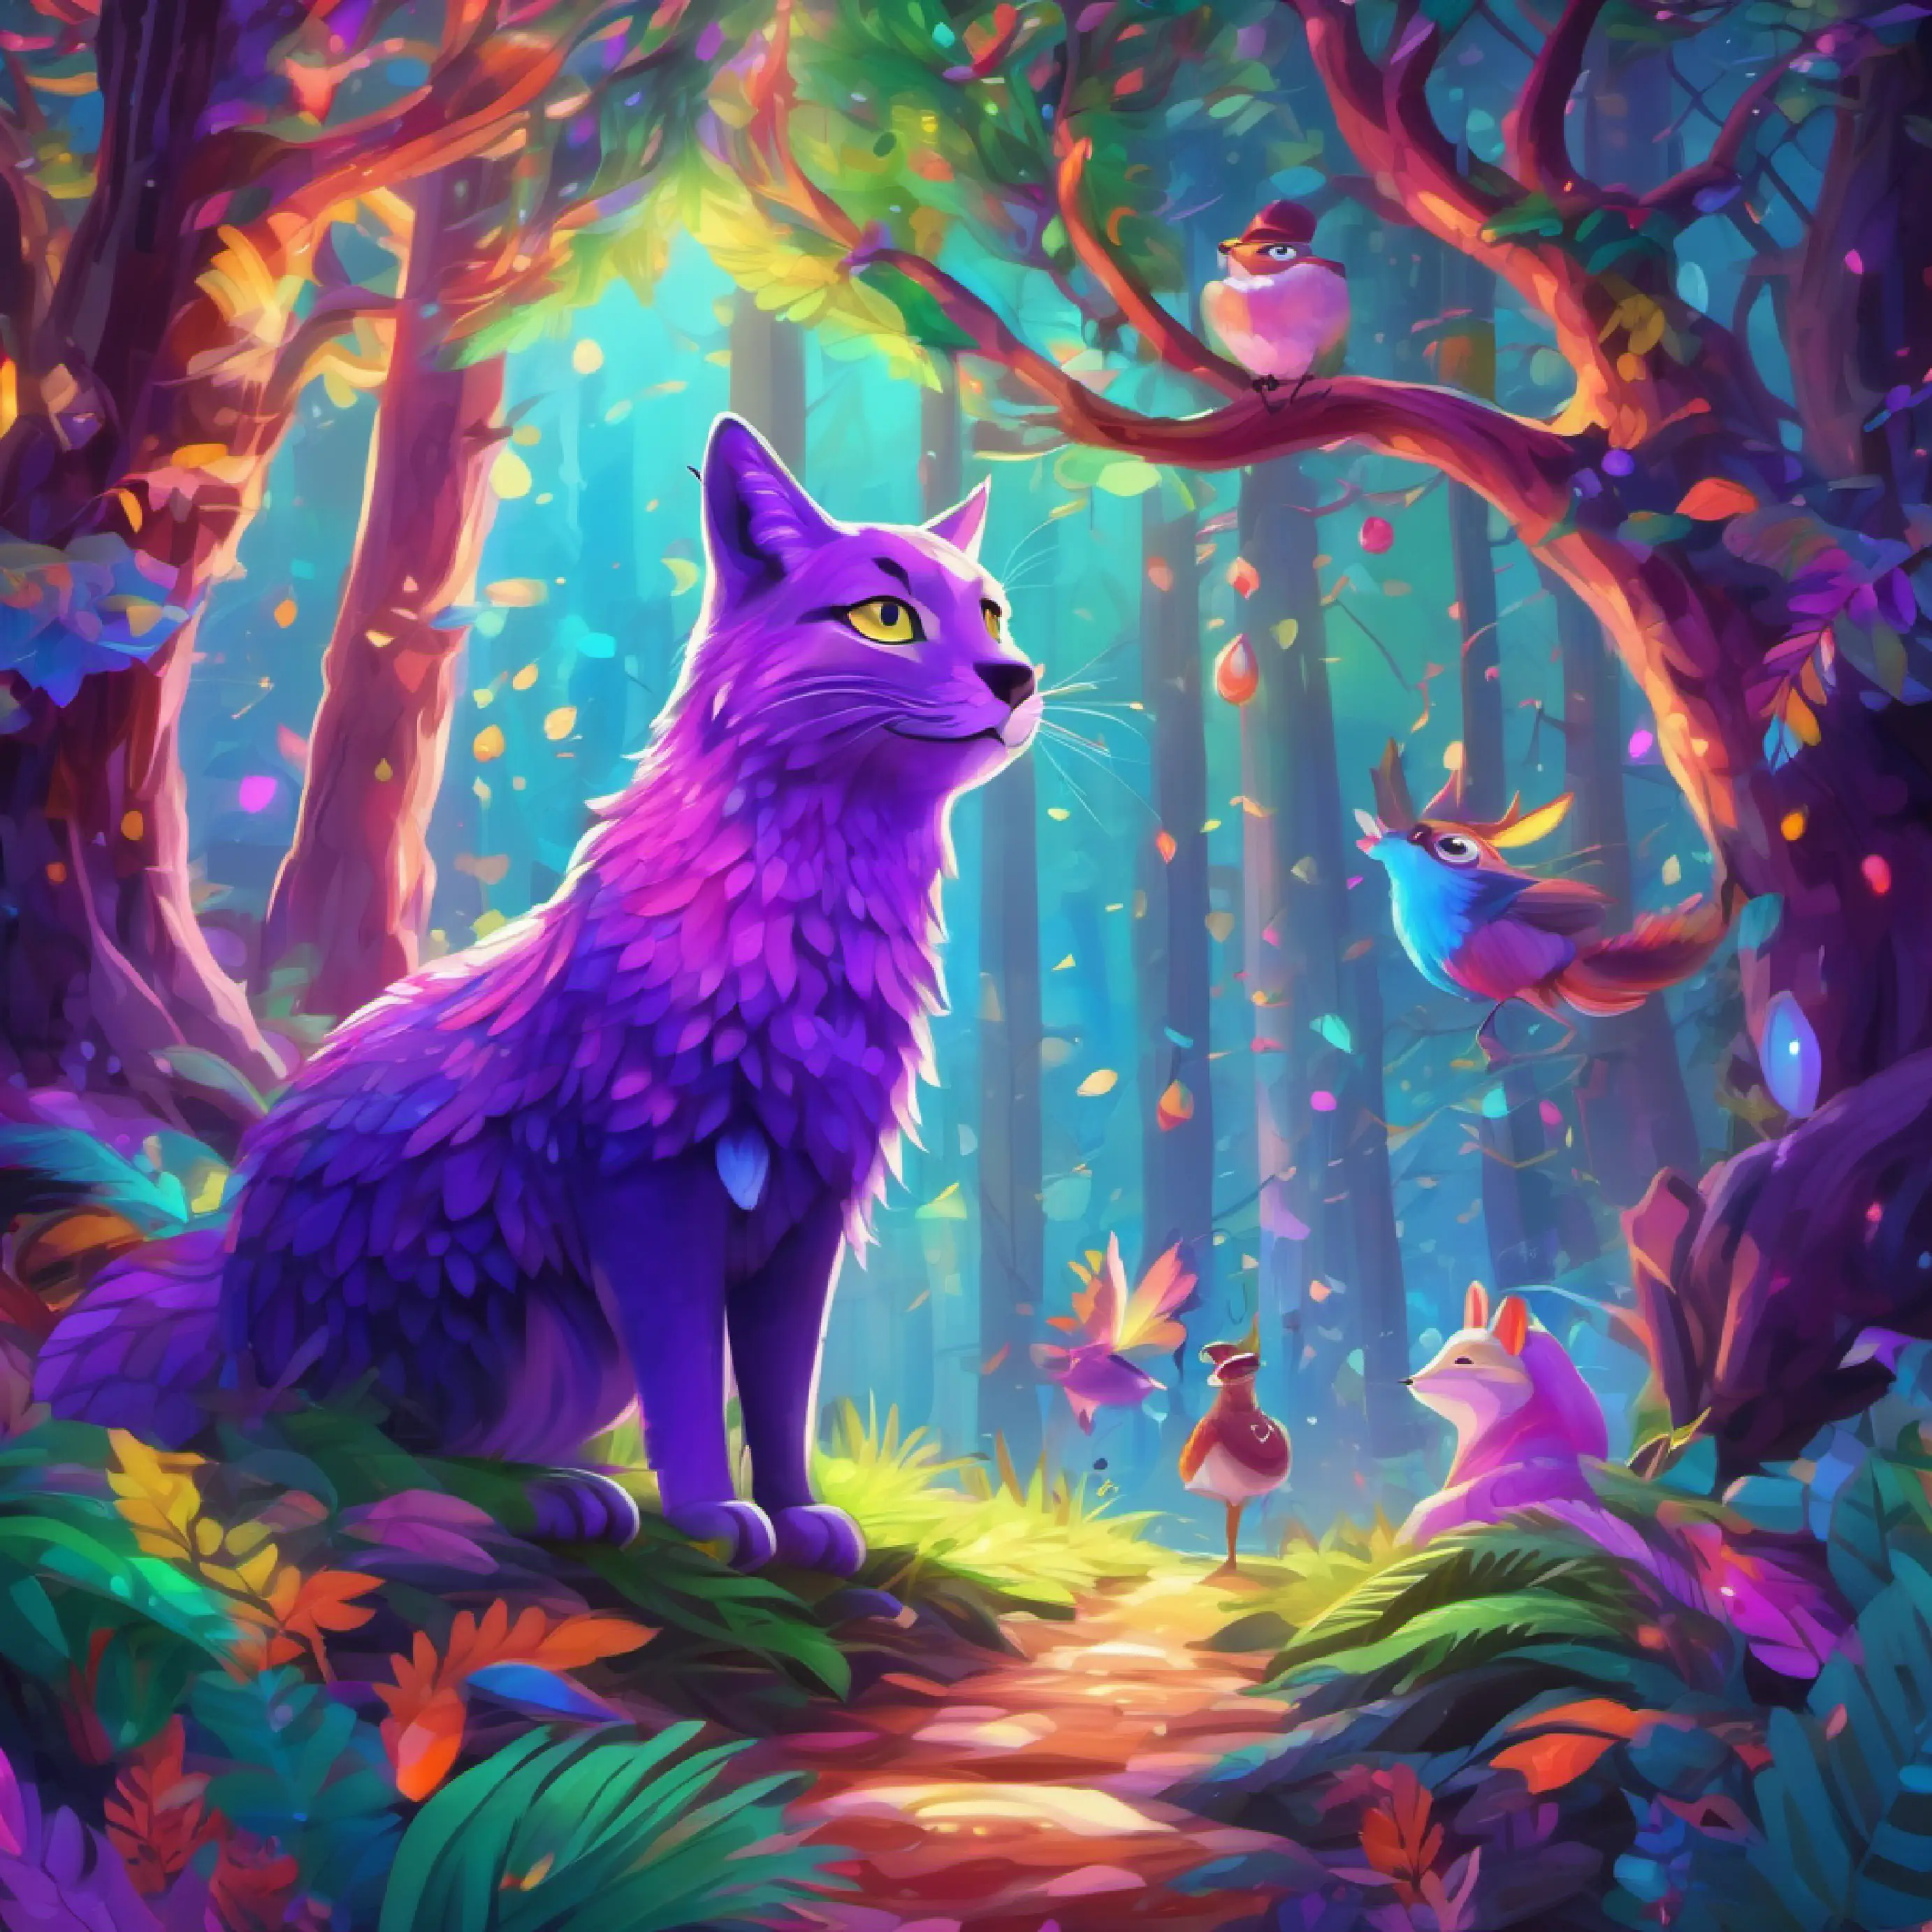 Forest setting, Shimmering multicolored scales, bright violet eyes spreading colors, animals watching.